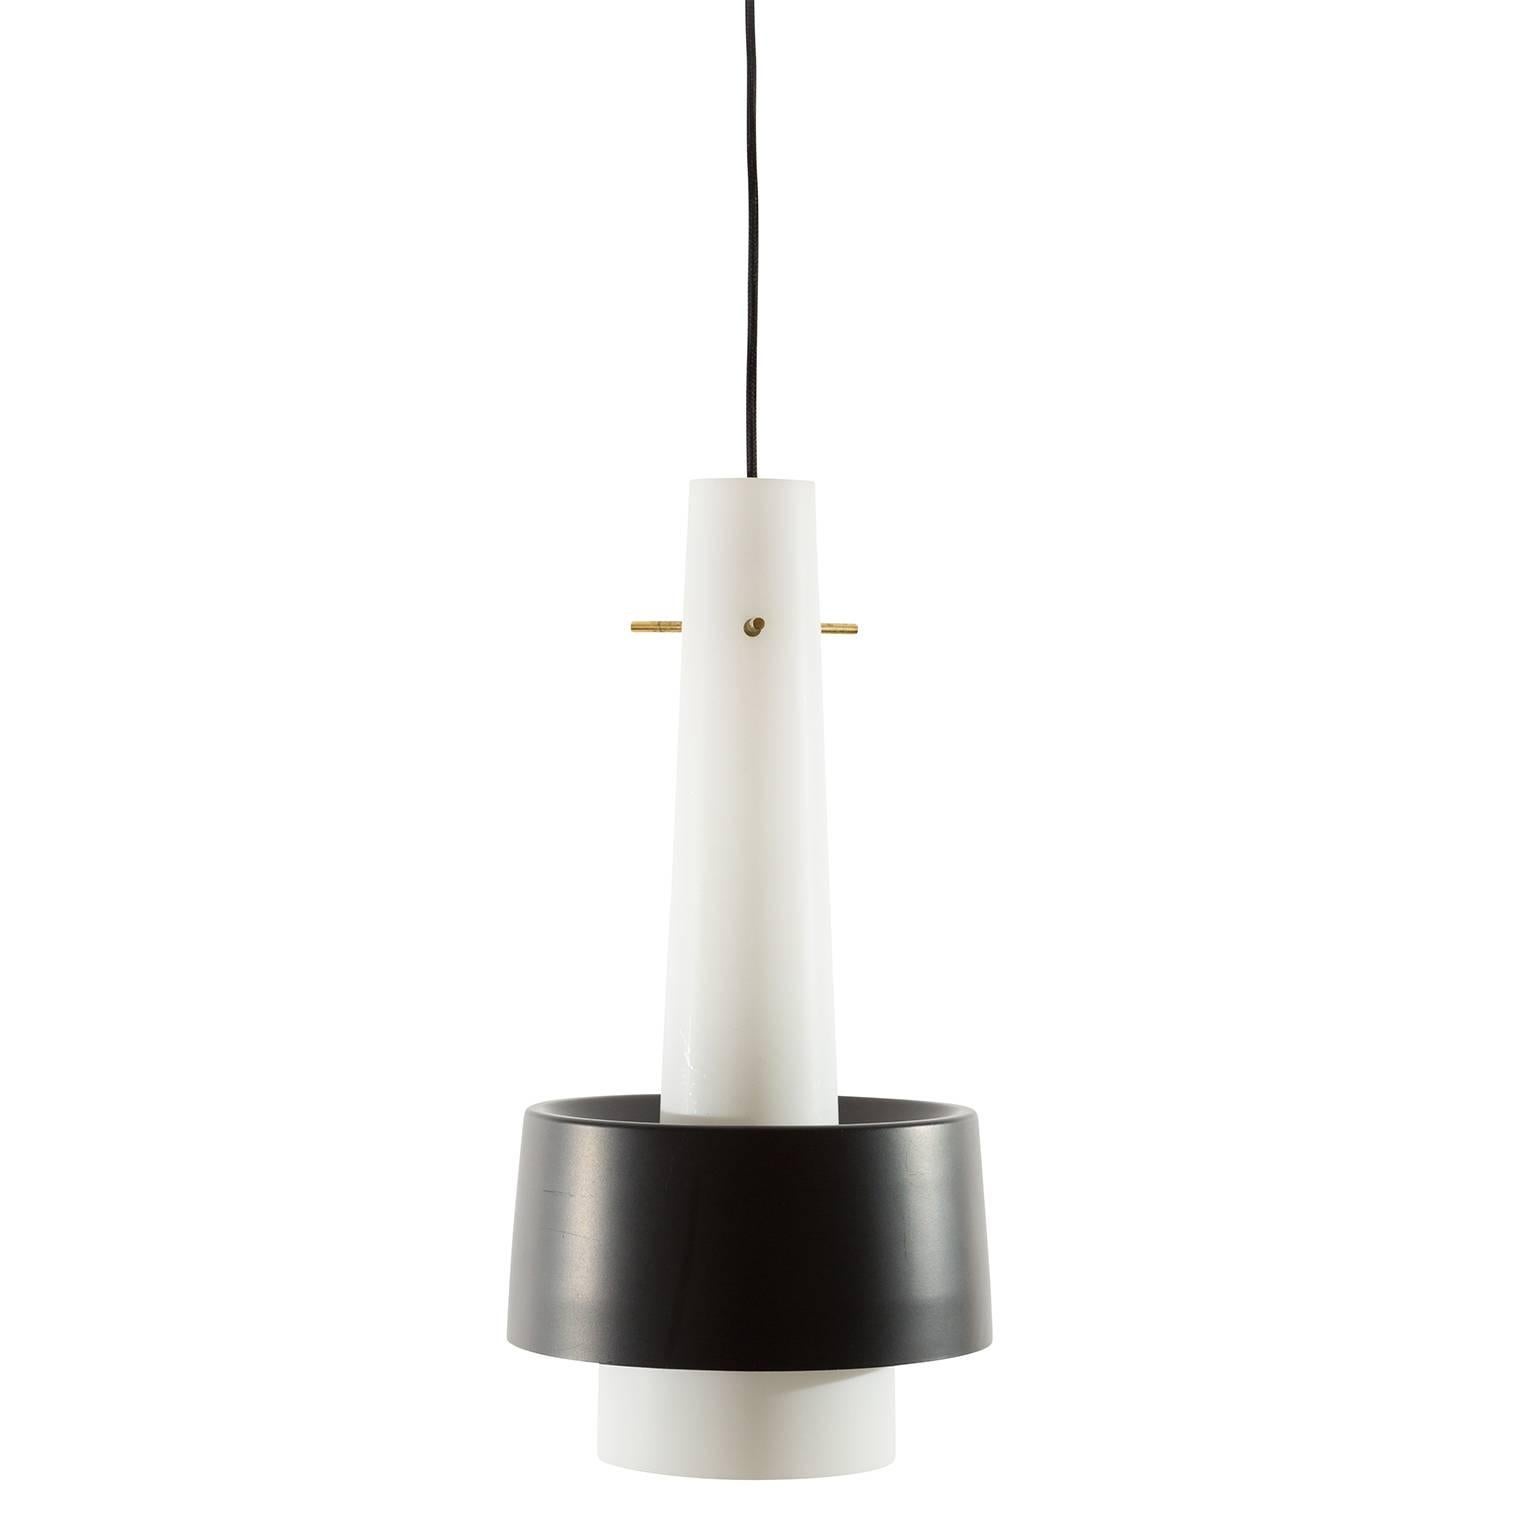 A set of three rare pendant light fixtures model 'Barett' by J.T. Kalmar, Austria, manufactured in midcentury, circa 1960. They are made of white satin opal glass and black lacquered metal shades.
Each lamp has one socket for a standard screw base